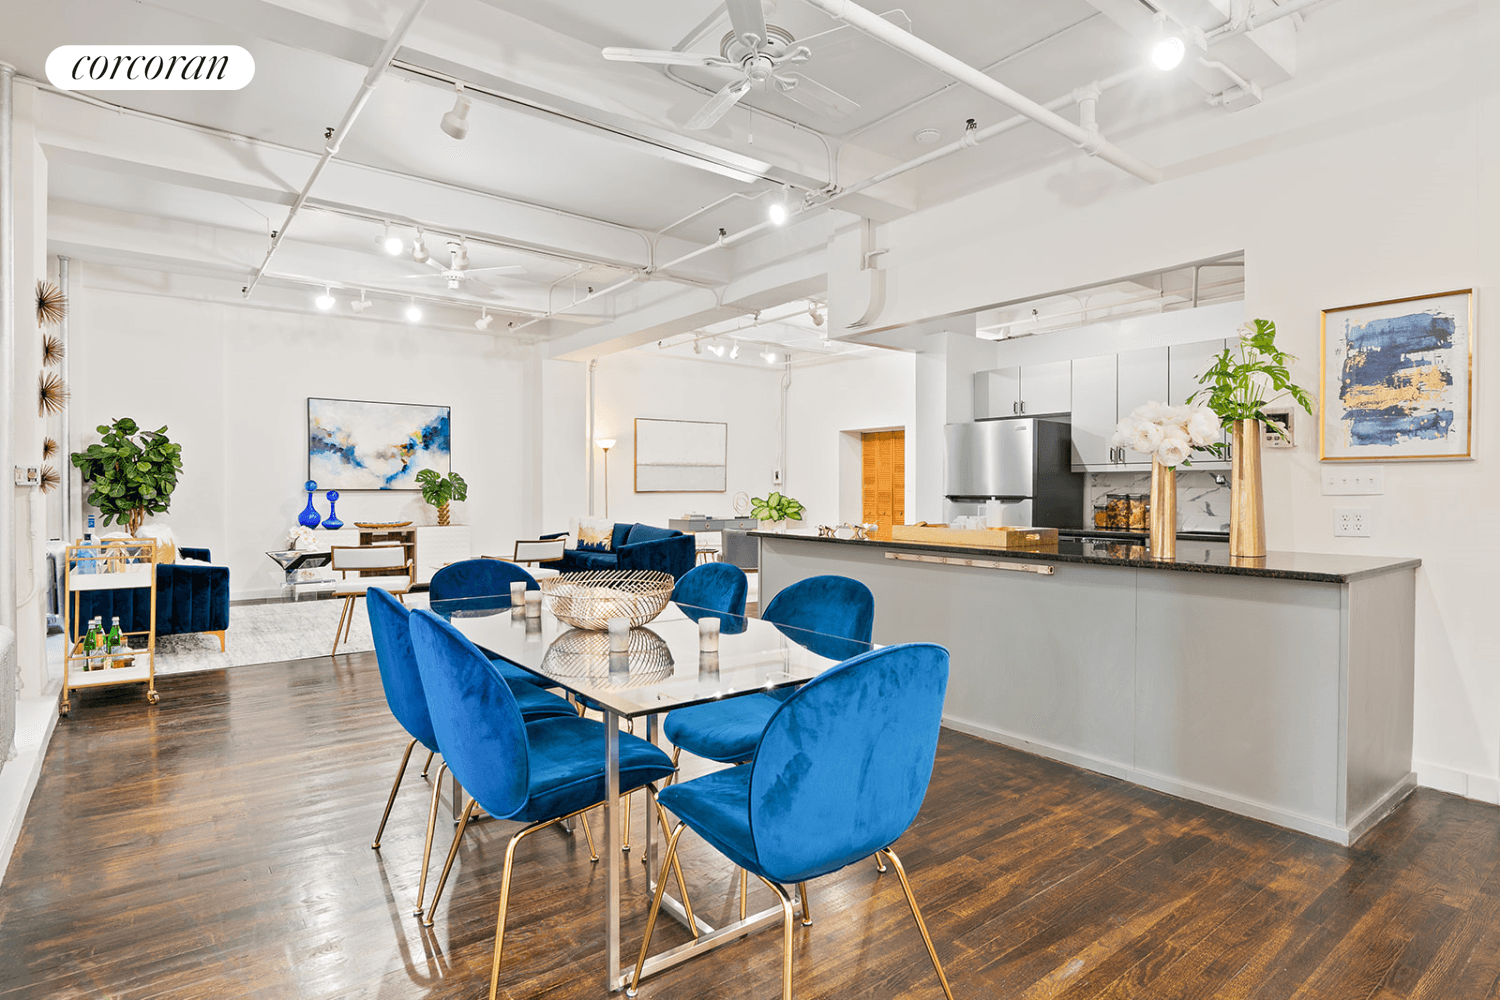 CHELSEA LOFT GREAT PRICE GREAT OPPORTUNITY HIGH CEILINGS HUGE WINDOWS OPEN LOFT FLOORPLAN WASHER DRYER LIVE WORK POSSIBILITIES Approximately 1400 SQ FT of sprawling wide open space in a Boutique ...